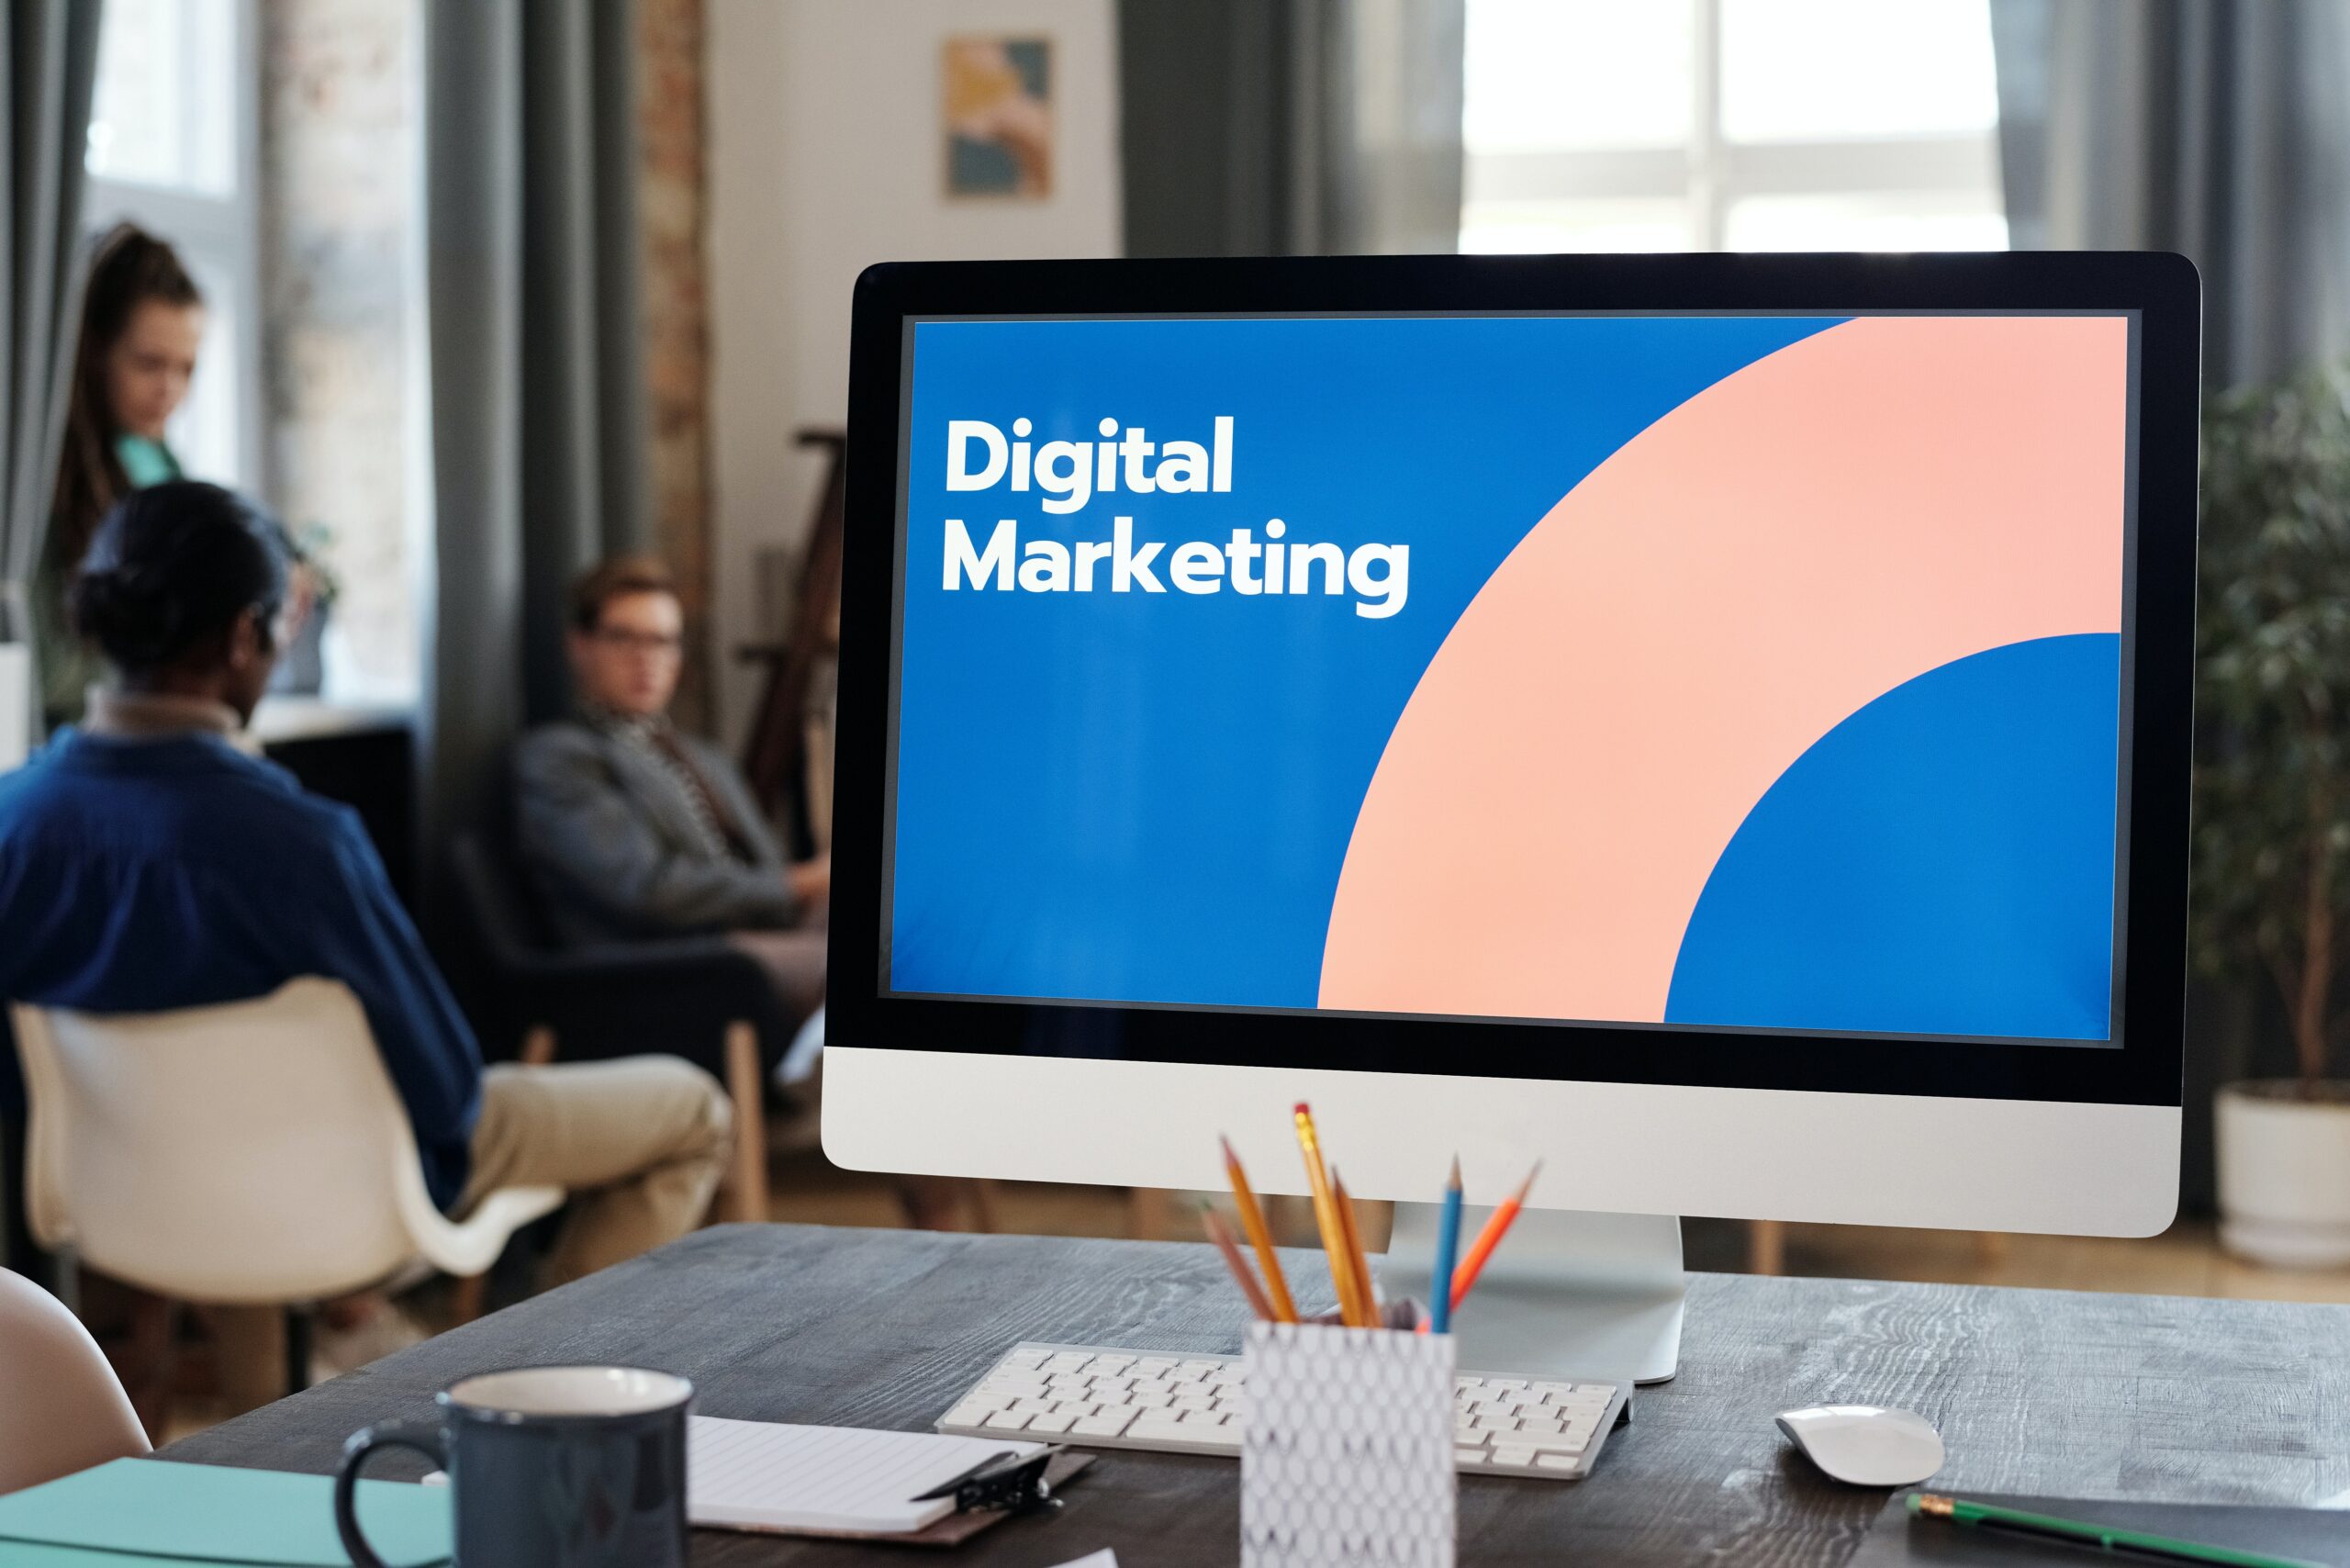 How can digital marketing boost your business?